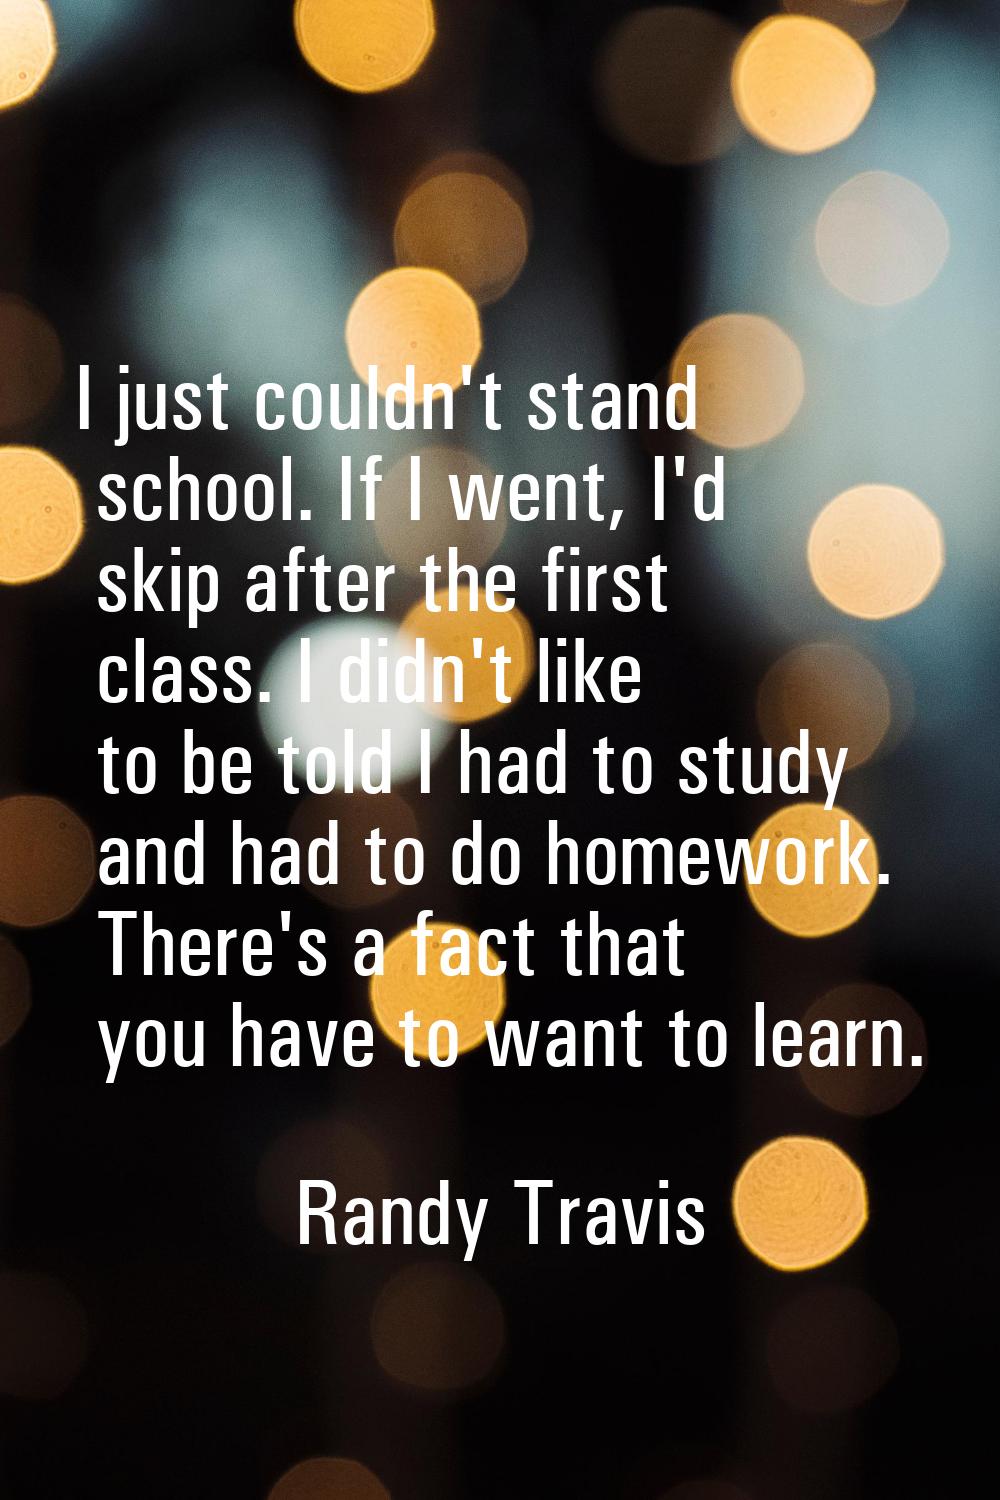 I just couldn't stand school. If I went, I'd skip after the first class. I didn't like to be told I